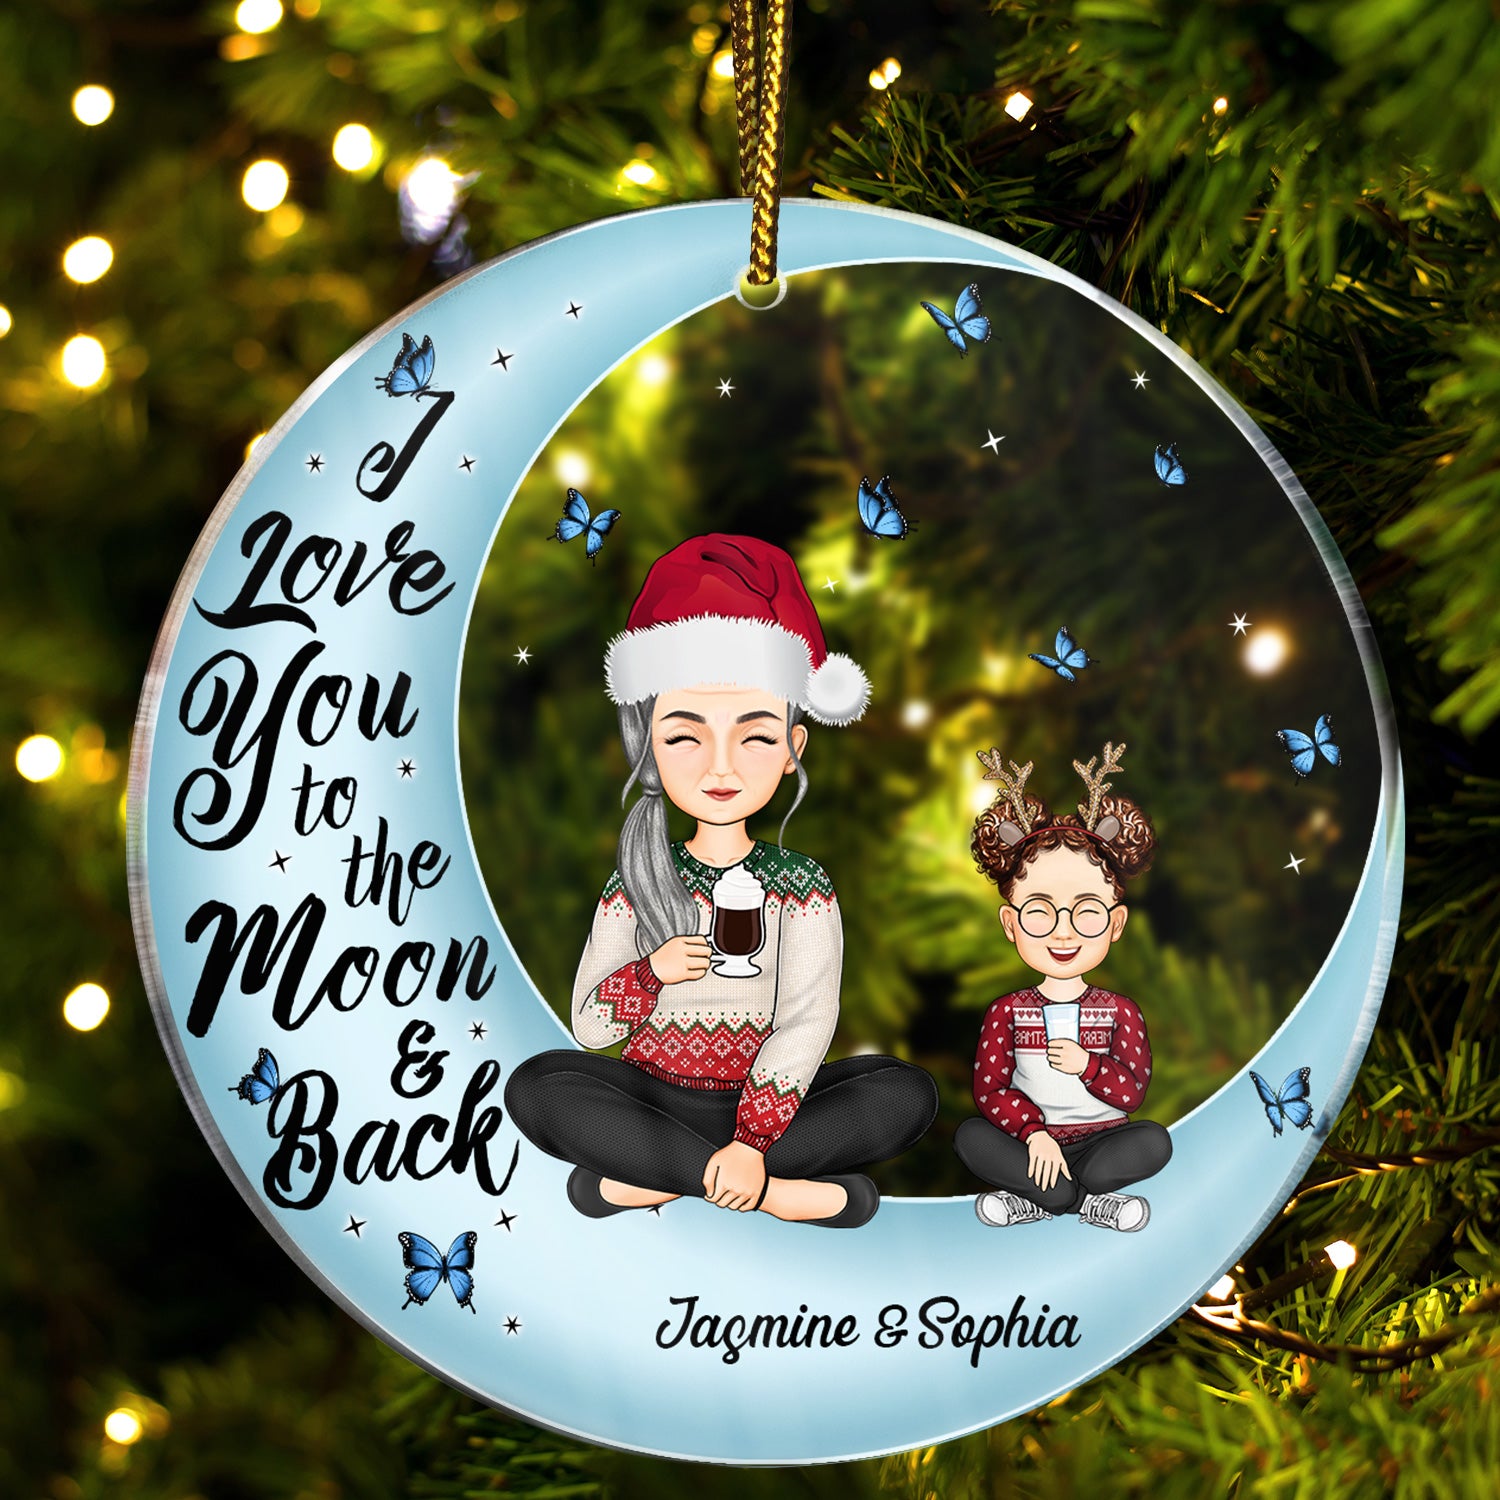 I Love You To The Moon And Back - Christmas Gift For Family, Grandparents, Parents - Personalized Circle Acrylic Ornament